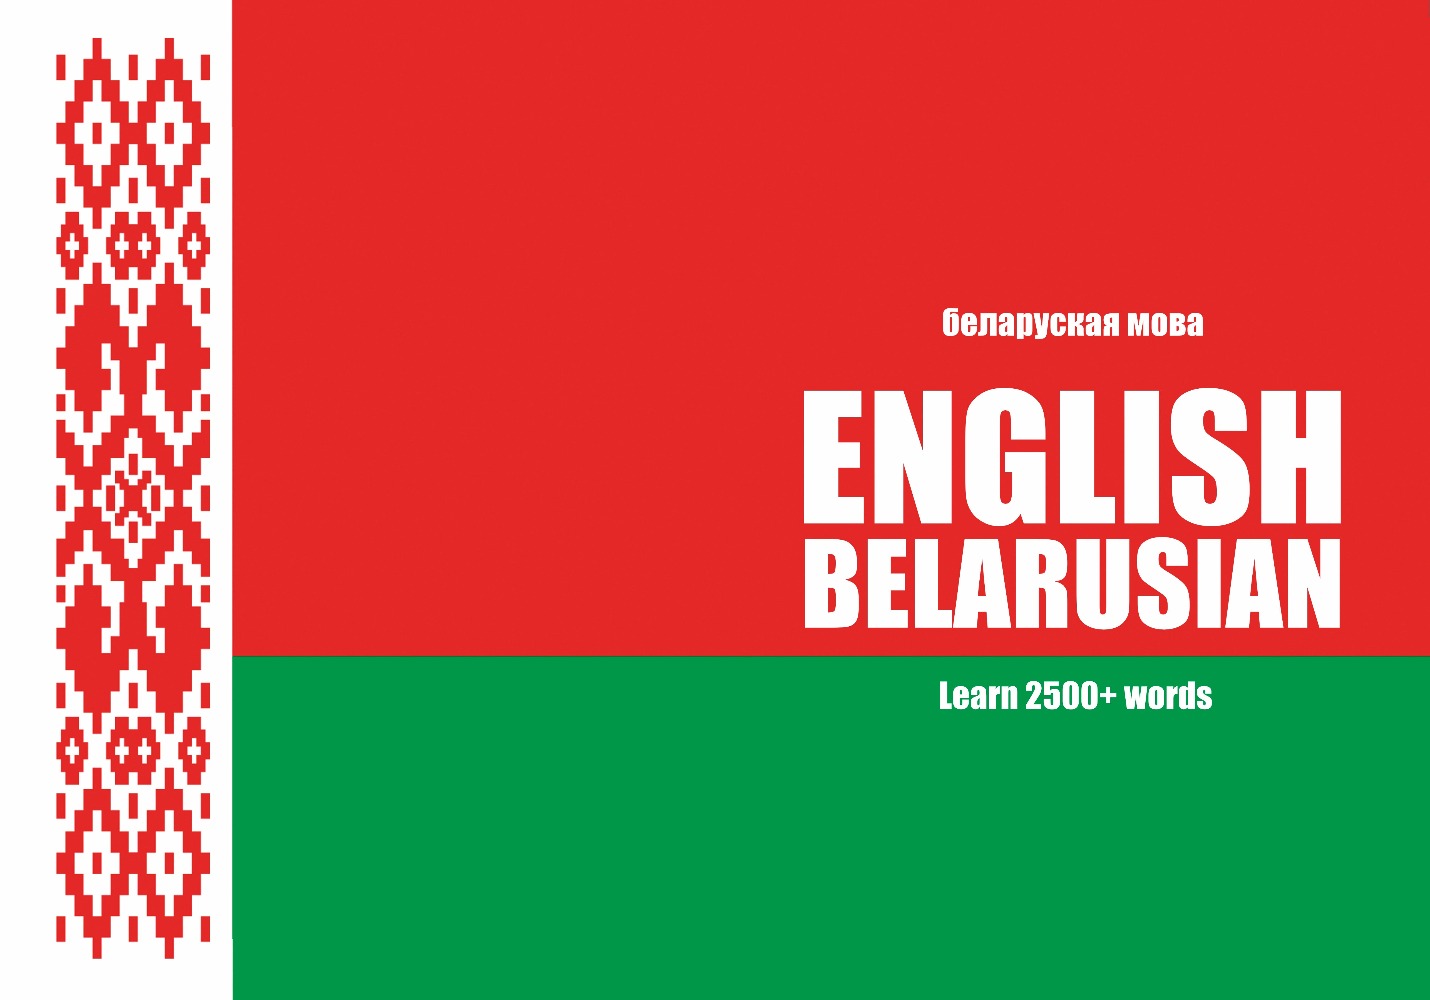 Belarusian language learning notebook cover